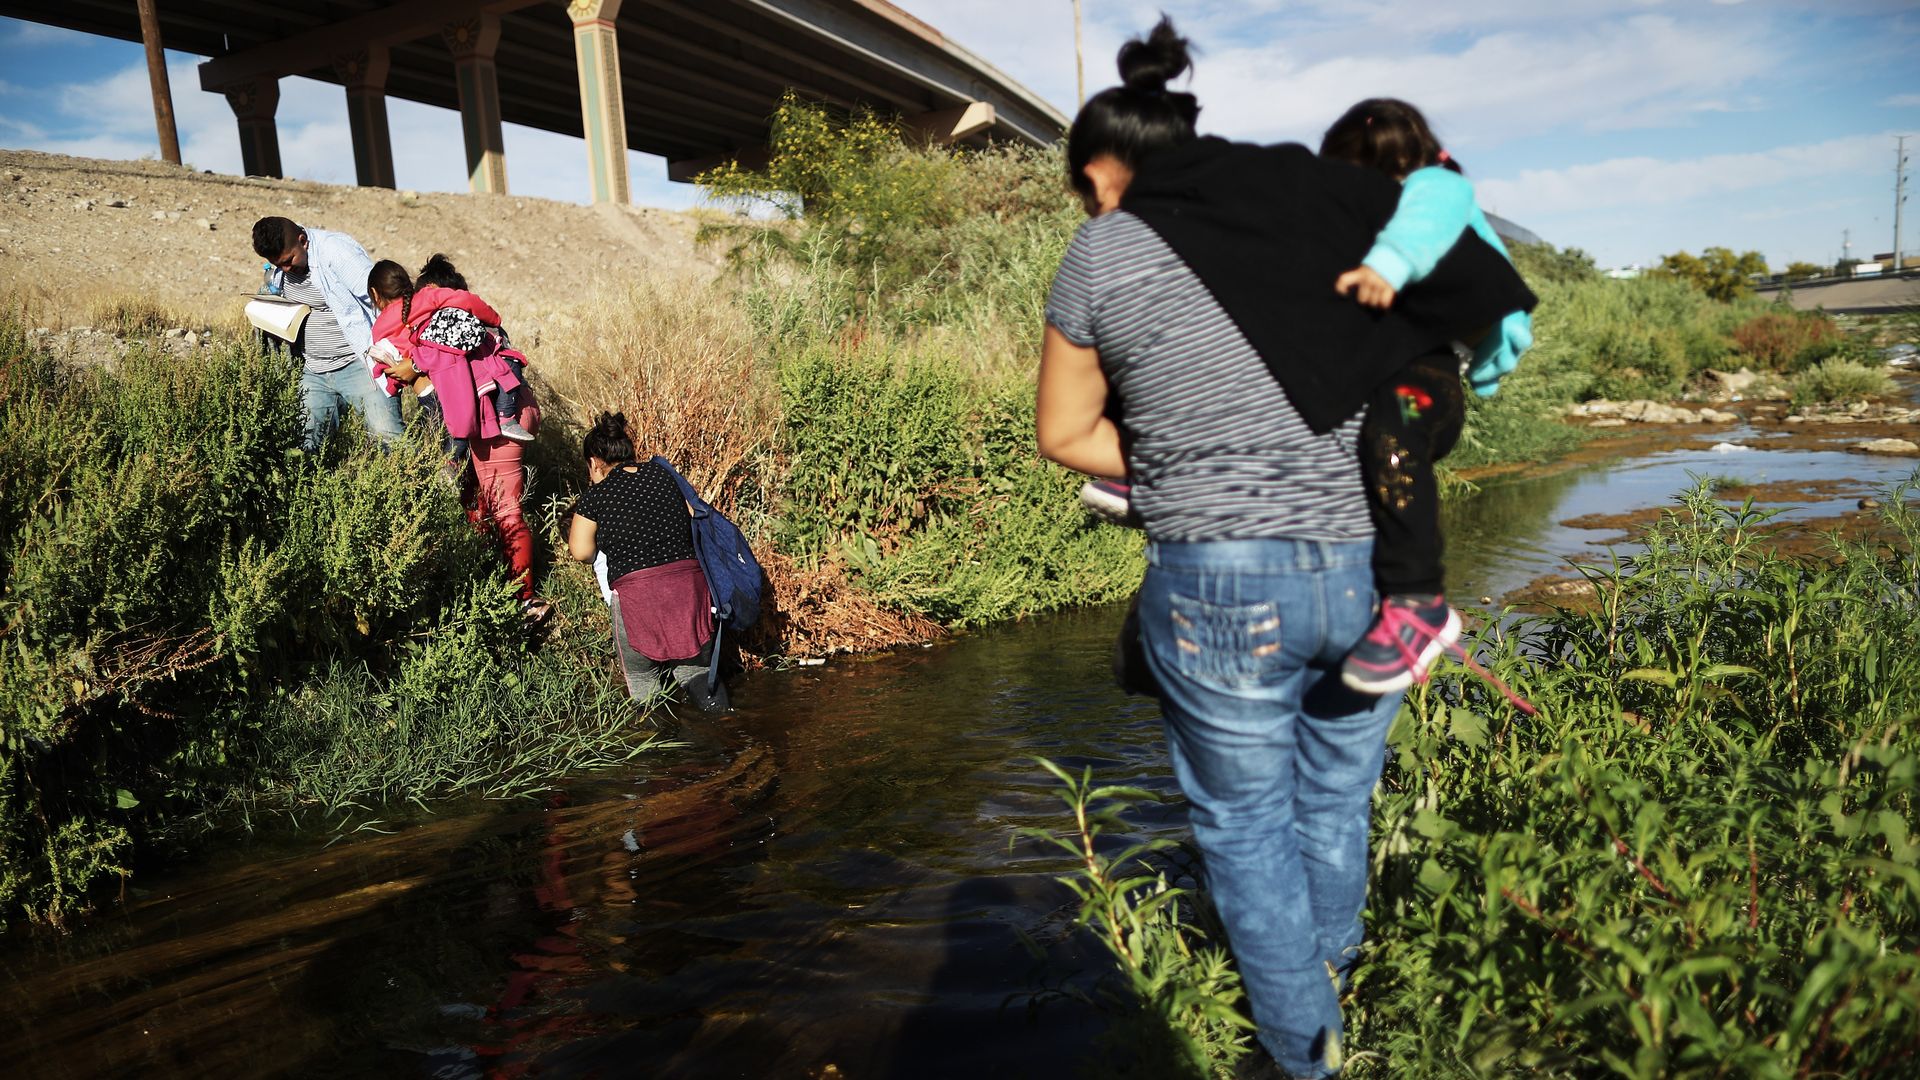 Migrants cross the border between the U.S. and Mexico at the Rio Grande river, as they walk to enter El Paso, Texas,.